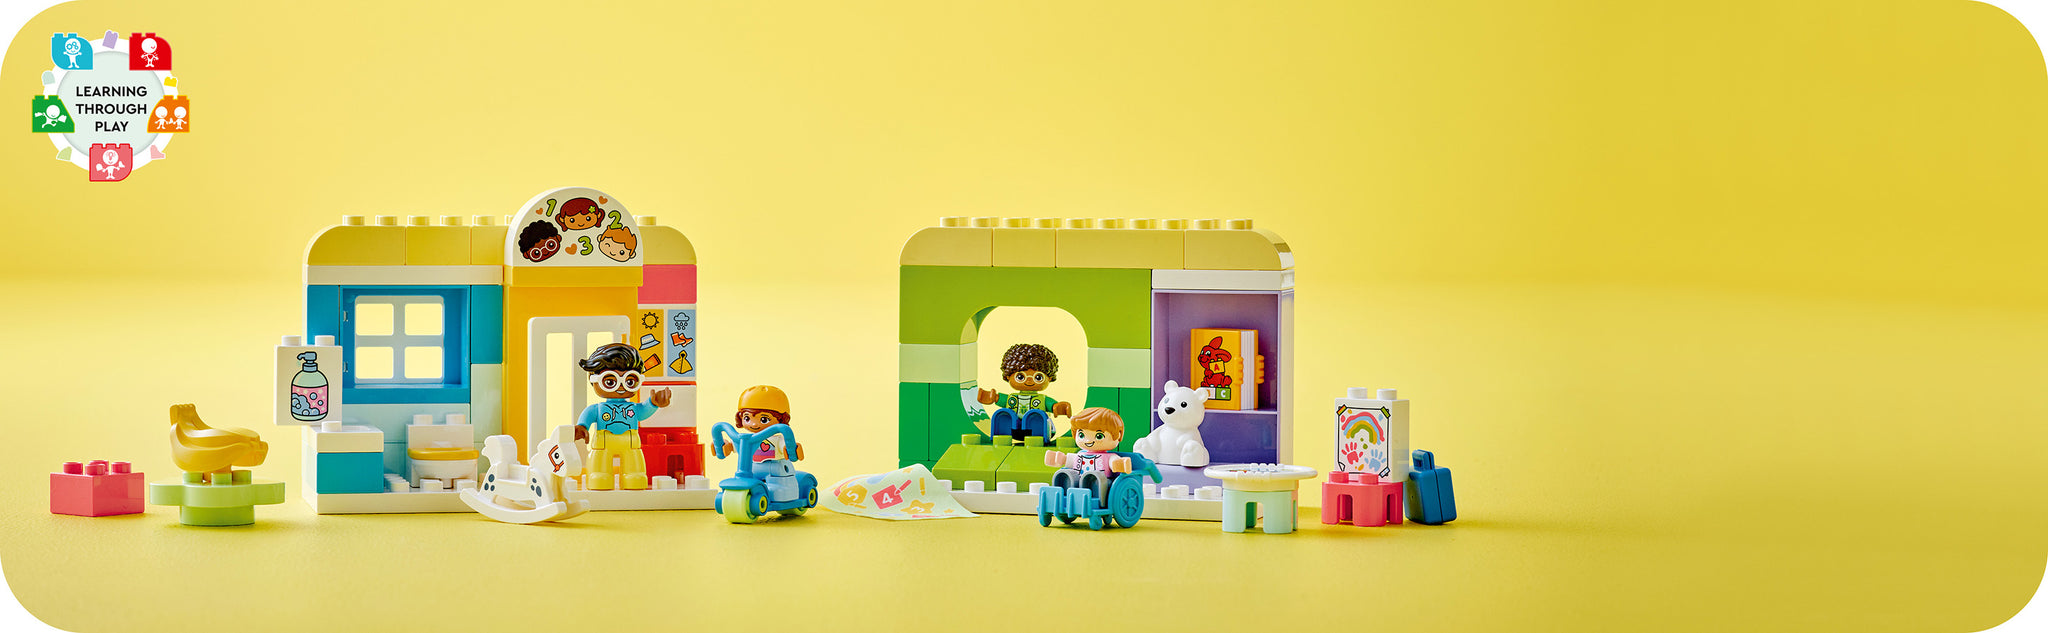 Toddlers aged 2 years and older learn through play with the LEGO® DUPLO® City Life in Daycare (10992) set. This educational toy set lets kids role-play everyday habits while learning about numbers and colors. Packed with realistic details The set is packed with creative activities that allow parents and children to role-play social play scenarios, just like in a real nursery. Kids can finger paint or enjoy a healthy snack. The wheelchair user can go down the ramp to join the other children who are zooming through the garden on the scooter. Parents can also teach the importance of washing hands in the toilet with sink. Stimulate the senses Like all LEGO DUPLO toddler toys, this set has brightly colored bricks that are fun to build with. The fabric number mat provides a tangible element. LEGO DUPLO sets help children better understand the world around them with recognizable environments and diverse characters. Colorful learning toy for kids – prepare toddlers aged 2 and up for kindergarten and introduce them to numbers and colors with the LEGO® DUPLO® City Daycare Life (10992) toy Lots of different characters – this colorful toy includes a figure of a preschool teacher and 3 children, so toddlers can learn how to play and share together Hours of creative activity – authentic features abound, from the drawing board and hand-washing toilet to dynamic elements such as the cute rocking horse and the toy scooter Develop motor skills - this nursery-style playset consists of 2 colorful parts, one for the toilet area and one for the sleeping area, so toddlers can have fun building Gift for young children - toddlers aged 2 years and over who like role-playing real-world stories will love this LEGO® DUPLO® playset as much as their parents who want to experience their children's developmental milestones Designed for little hands – this building toy measures over 5 in. (13 cm) high and 7 in. (19 cm) wide and can easily be combined with other LEGO® DUPLO® toys for even more realistic fun Toddler toys for curious kids – LEGO® DUPLO® sets are expertly designed with fun stories, bold colours, diverse characters and interesting details Consistent quality – LEGO® DUPLO® toys deliver to strict industry standards so it's easy for little fingers to grasp, put together and take apart: it's been that way since 1969 Safety guaranteed – LEGO® DUPLO® bricks and pieces are rigorously analyzed and tested to ensure they meet strict global safety standards